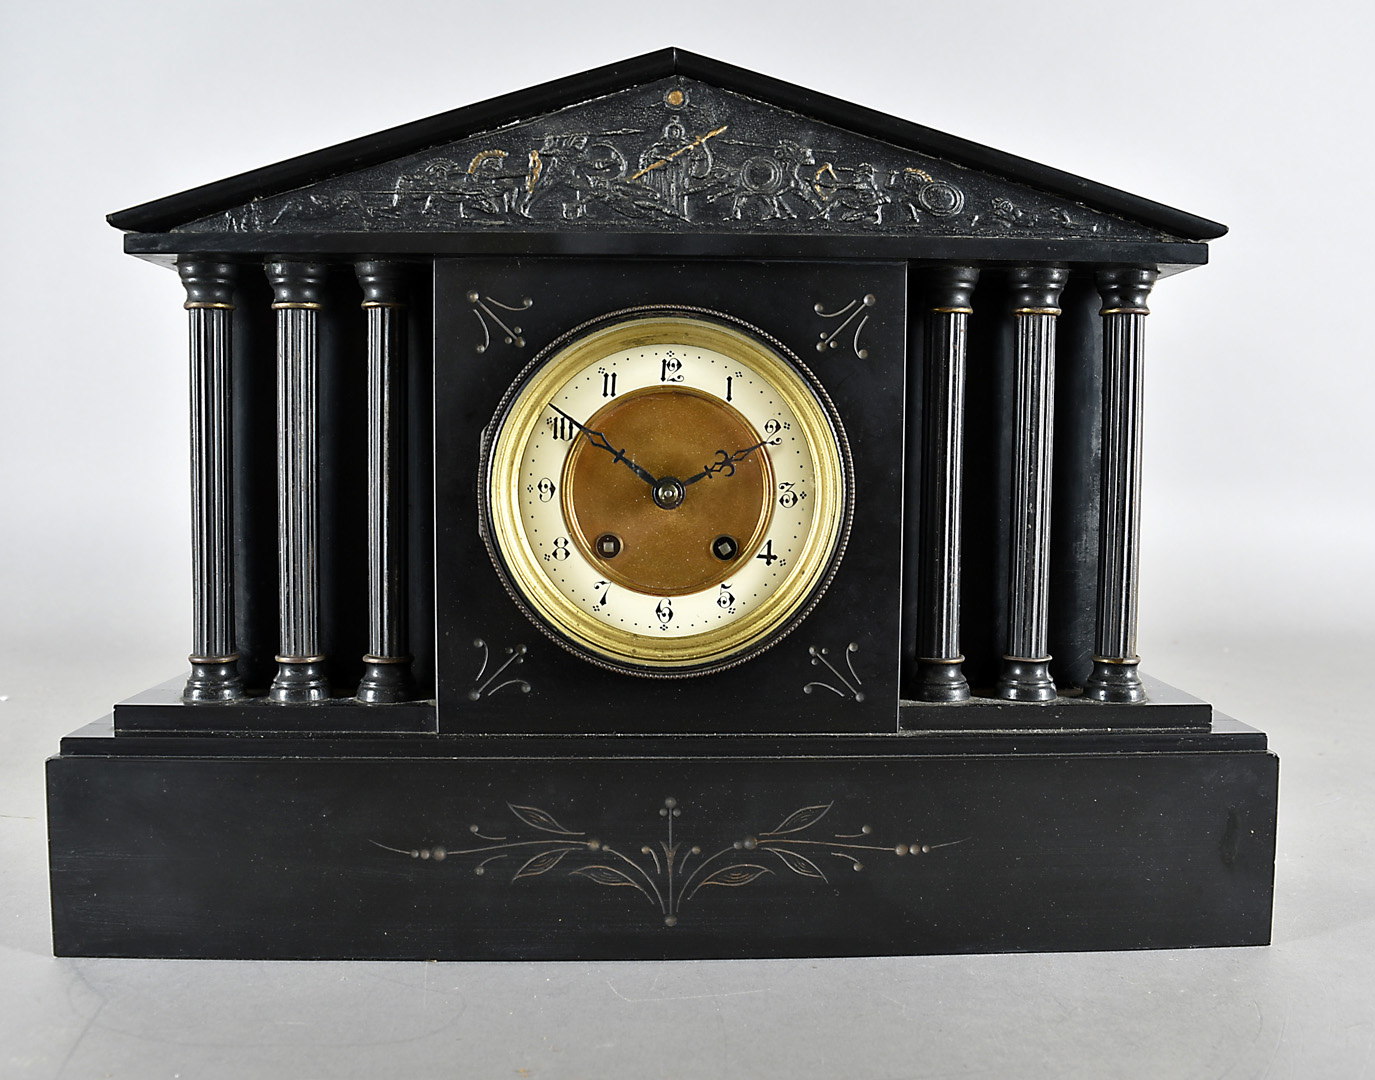 A 19th Century slate architectural mantel clock, with painted columns, arched pediment with